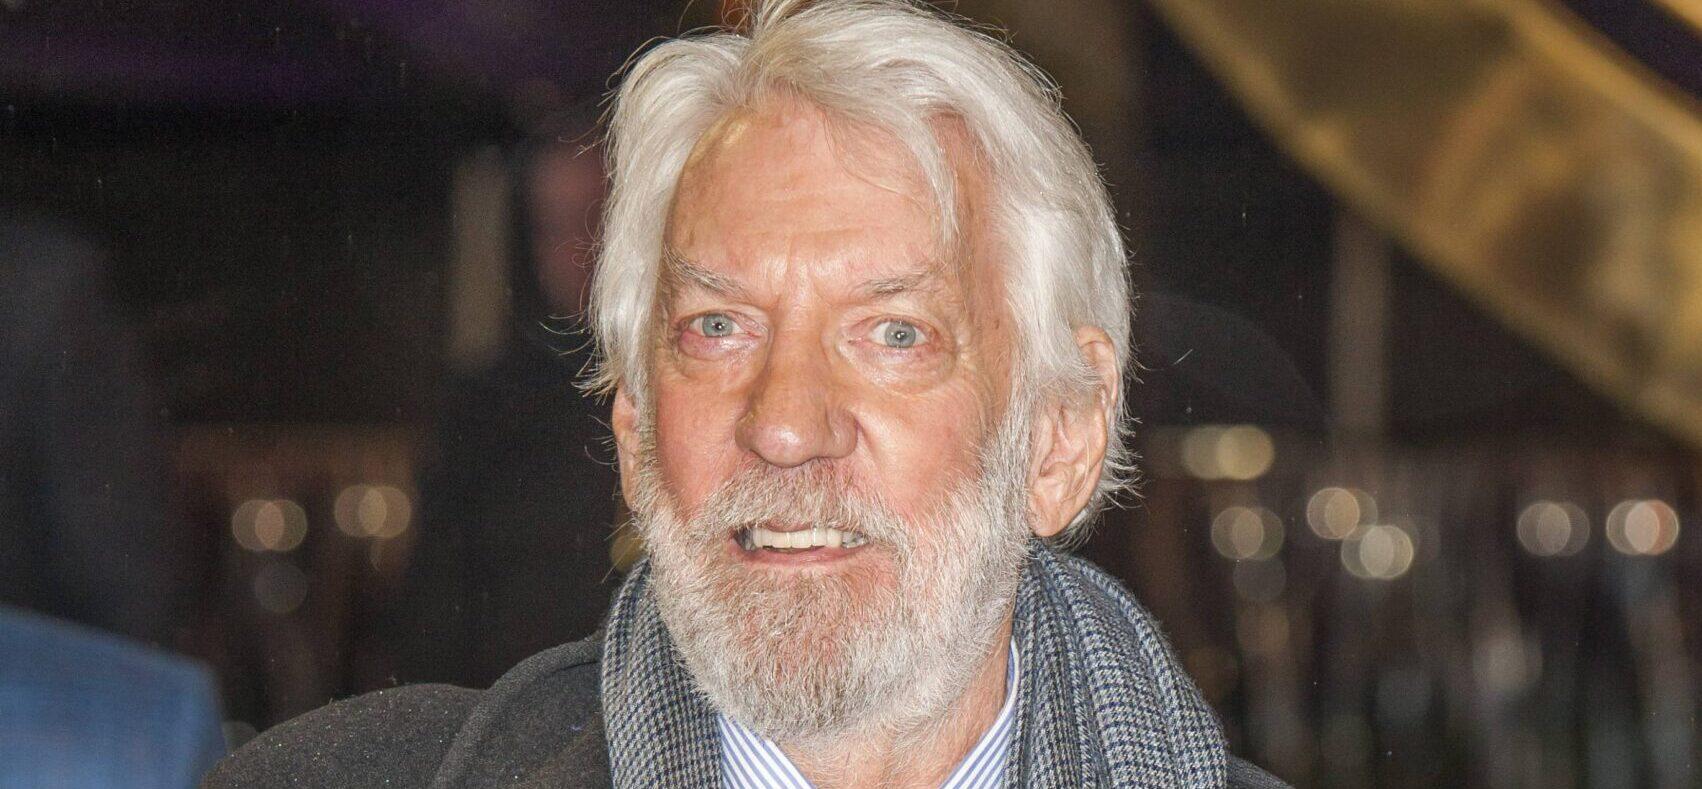 Actor Donald Sutherland attending the Hunger Games Catching Fire film premiere at the Odeon Leicester Square in London